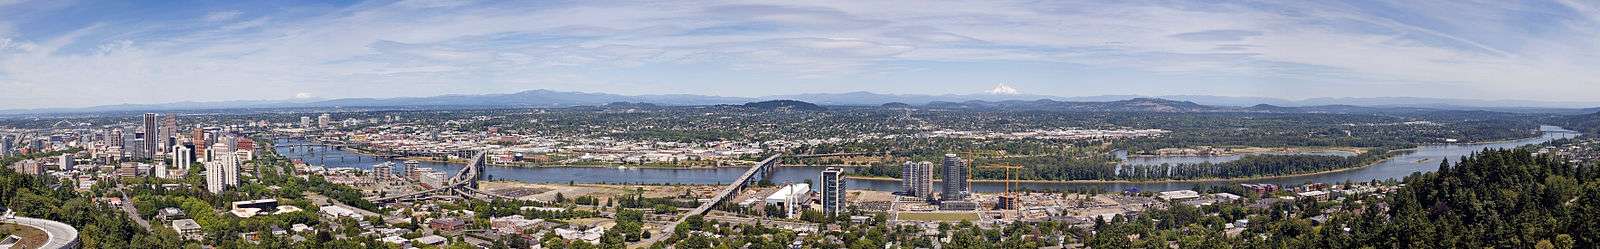 A panorama of Portland, with many buildings on either side of the Willamette River, with a number of bridges crossing it